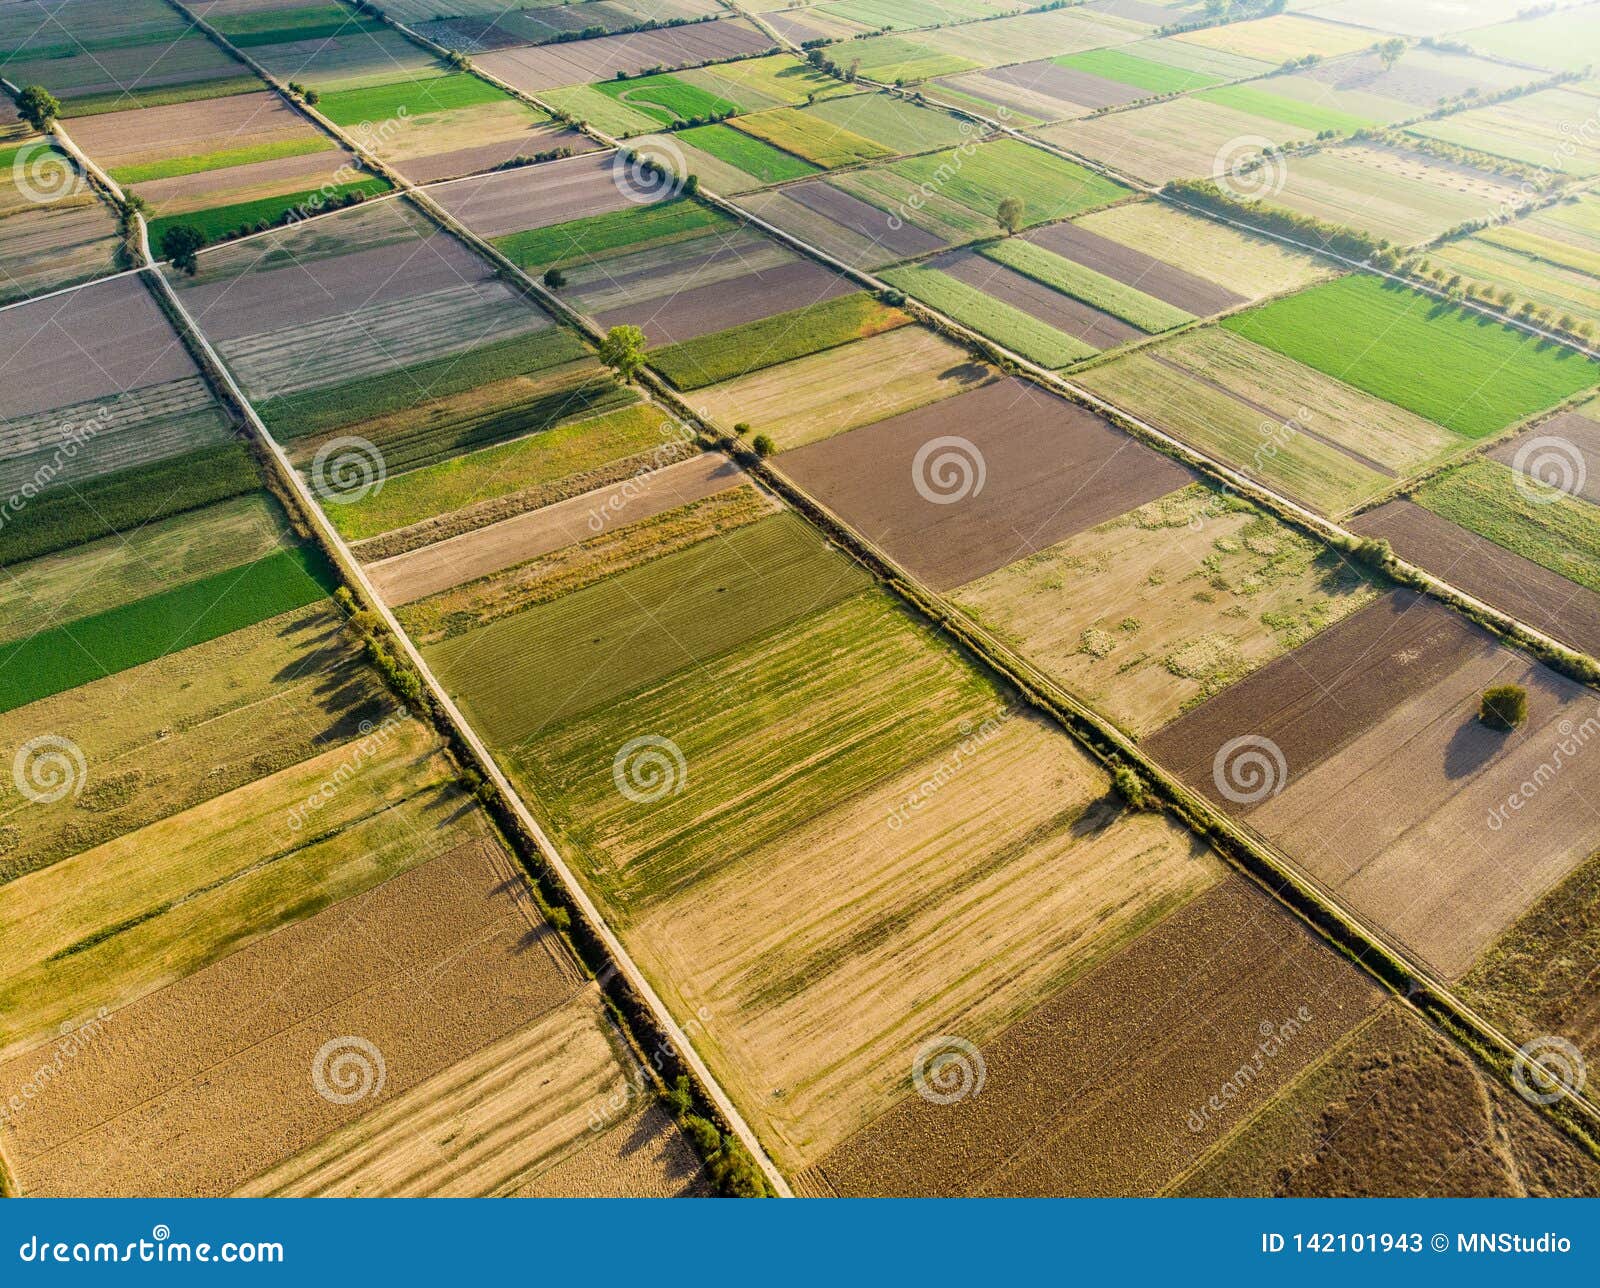 Abstract Geometric Shapes of Agricultural Parcels of Different Crops in ...